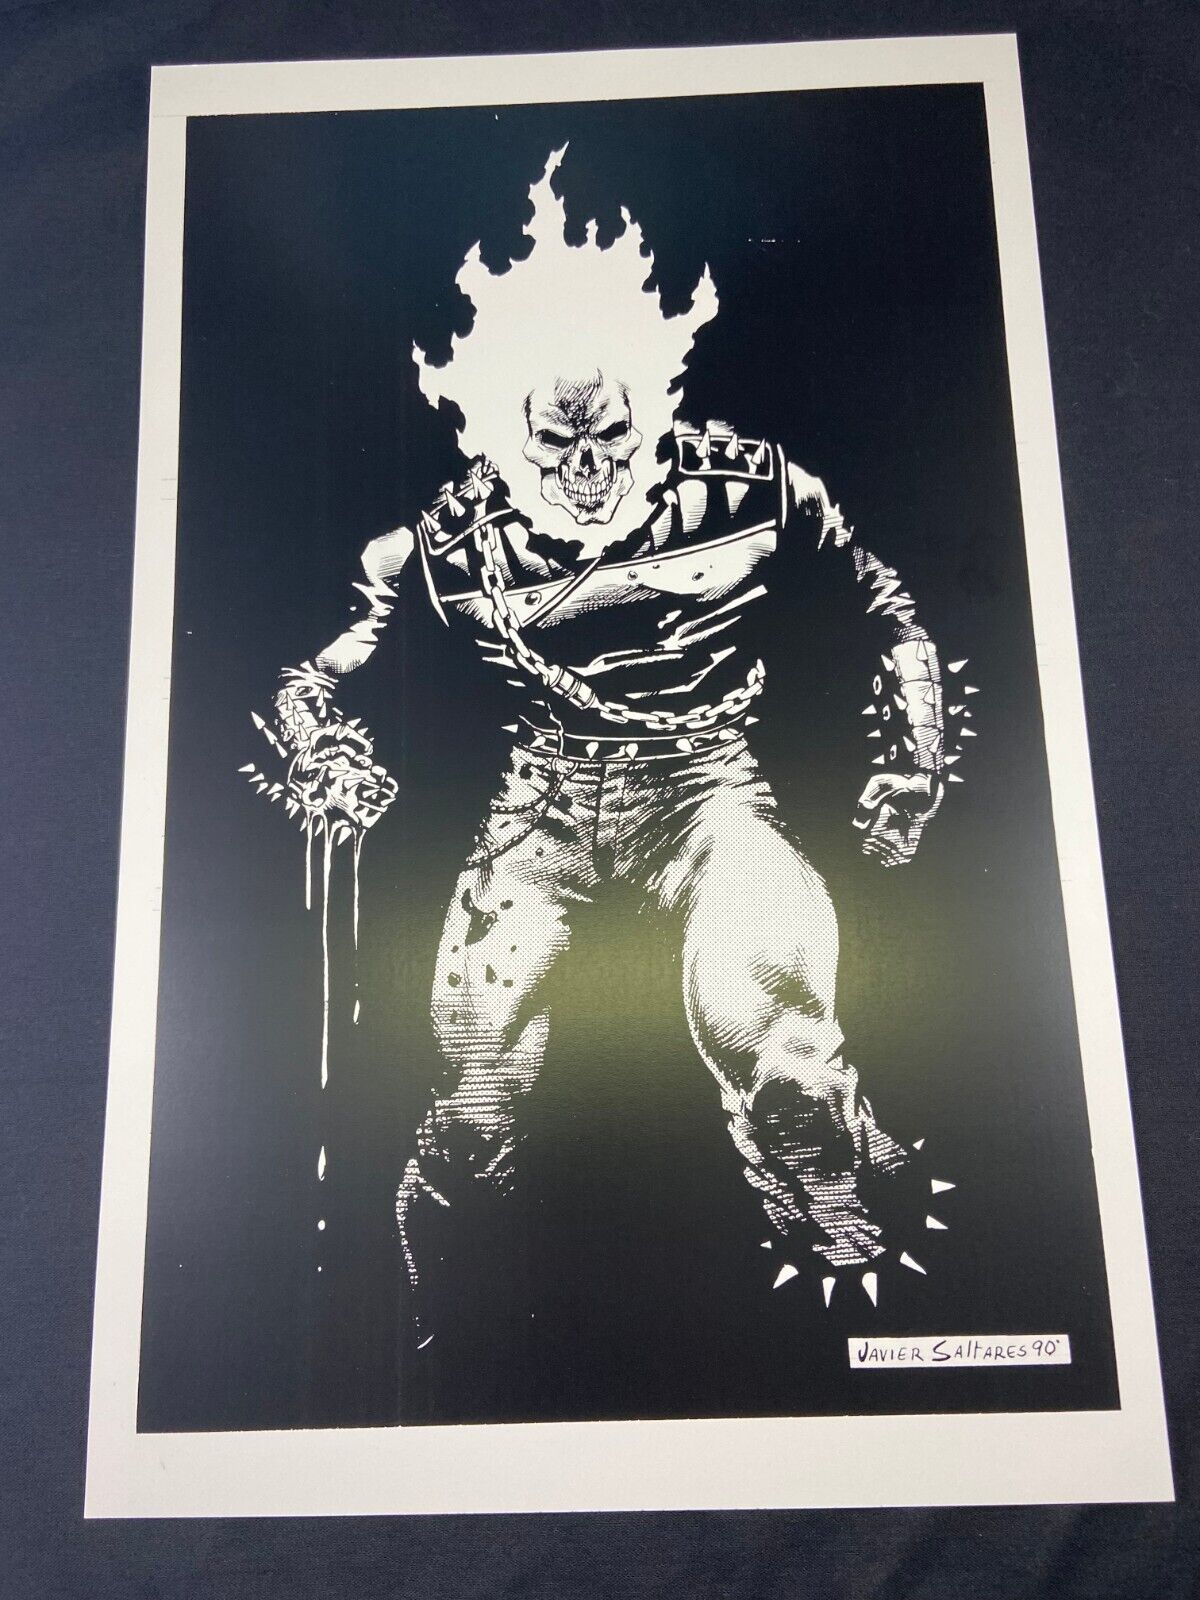 Awesome Rare Ghost Rider Print 11x17 by Javier Saltares Convention Print